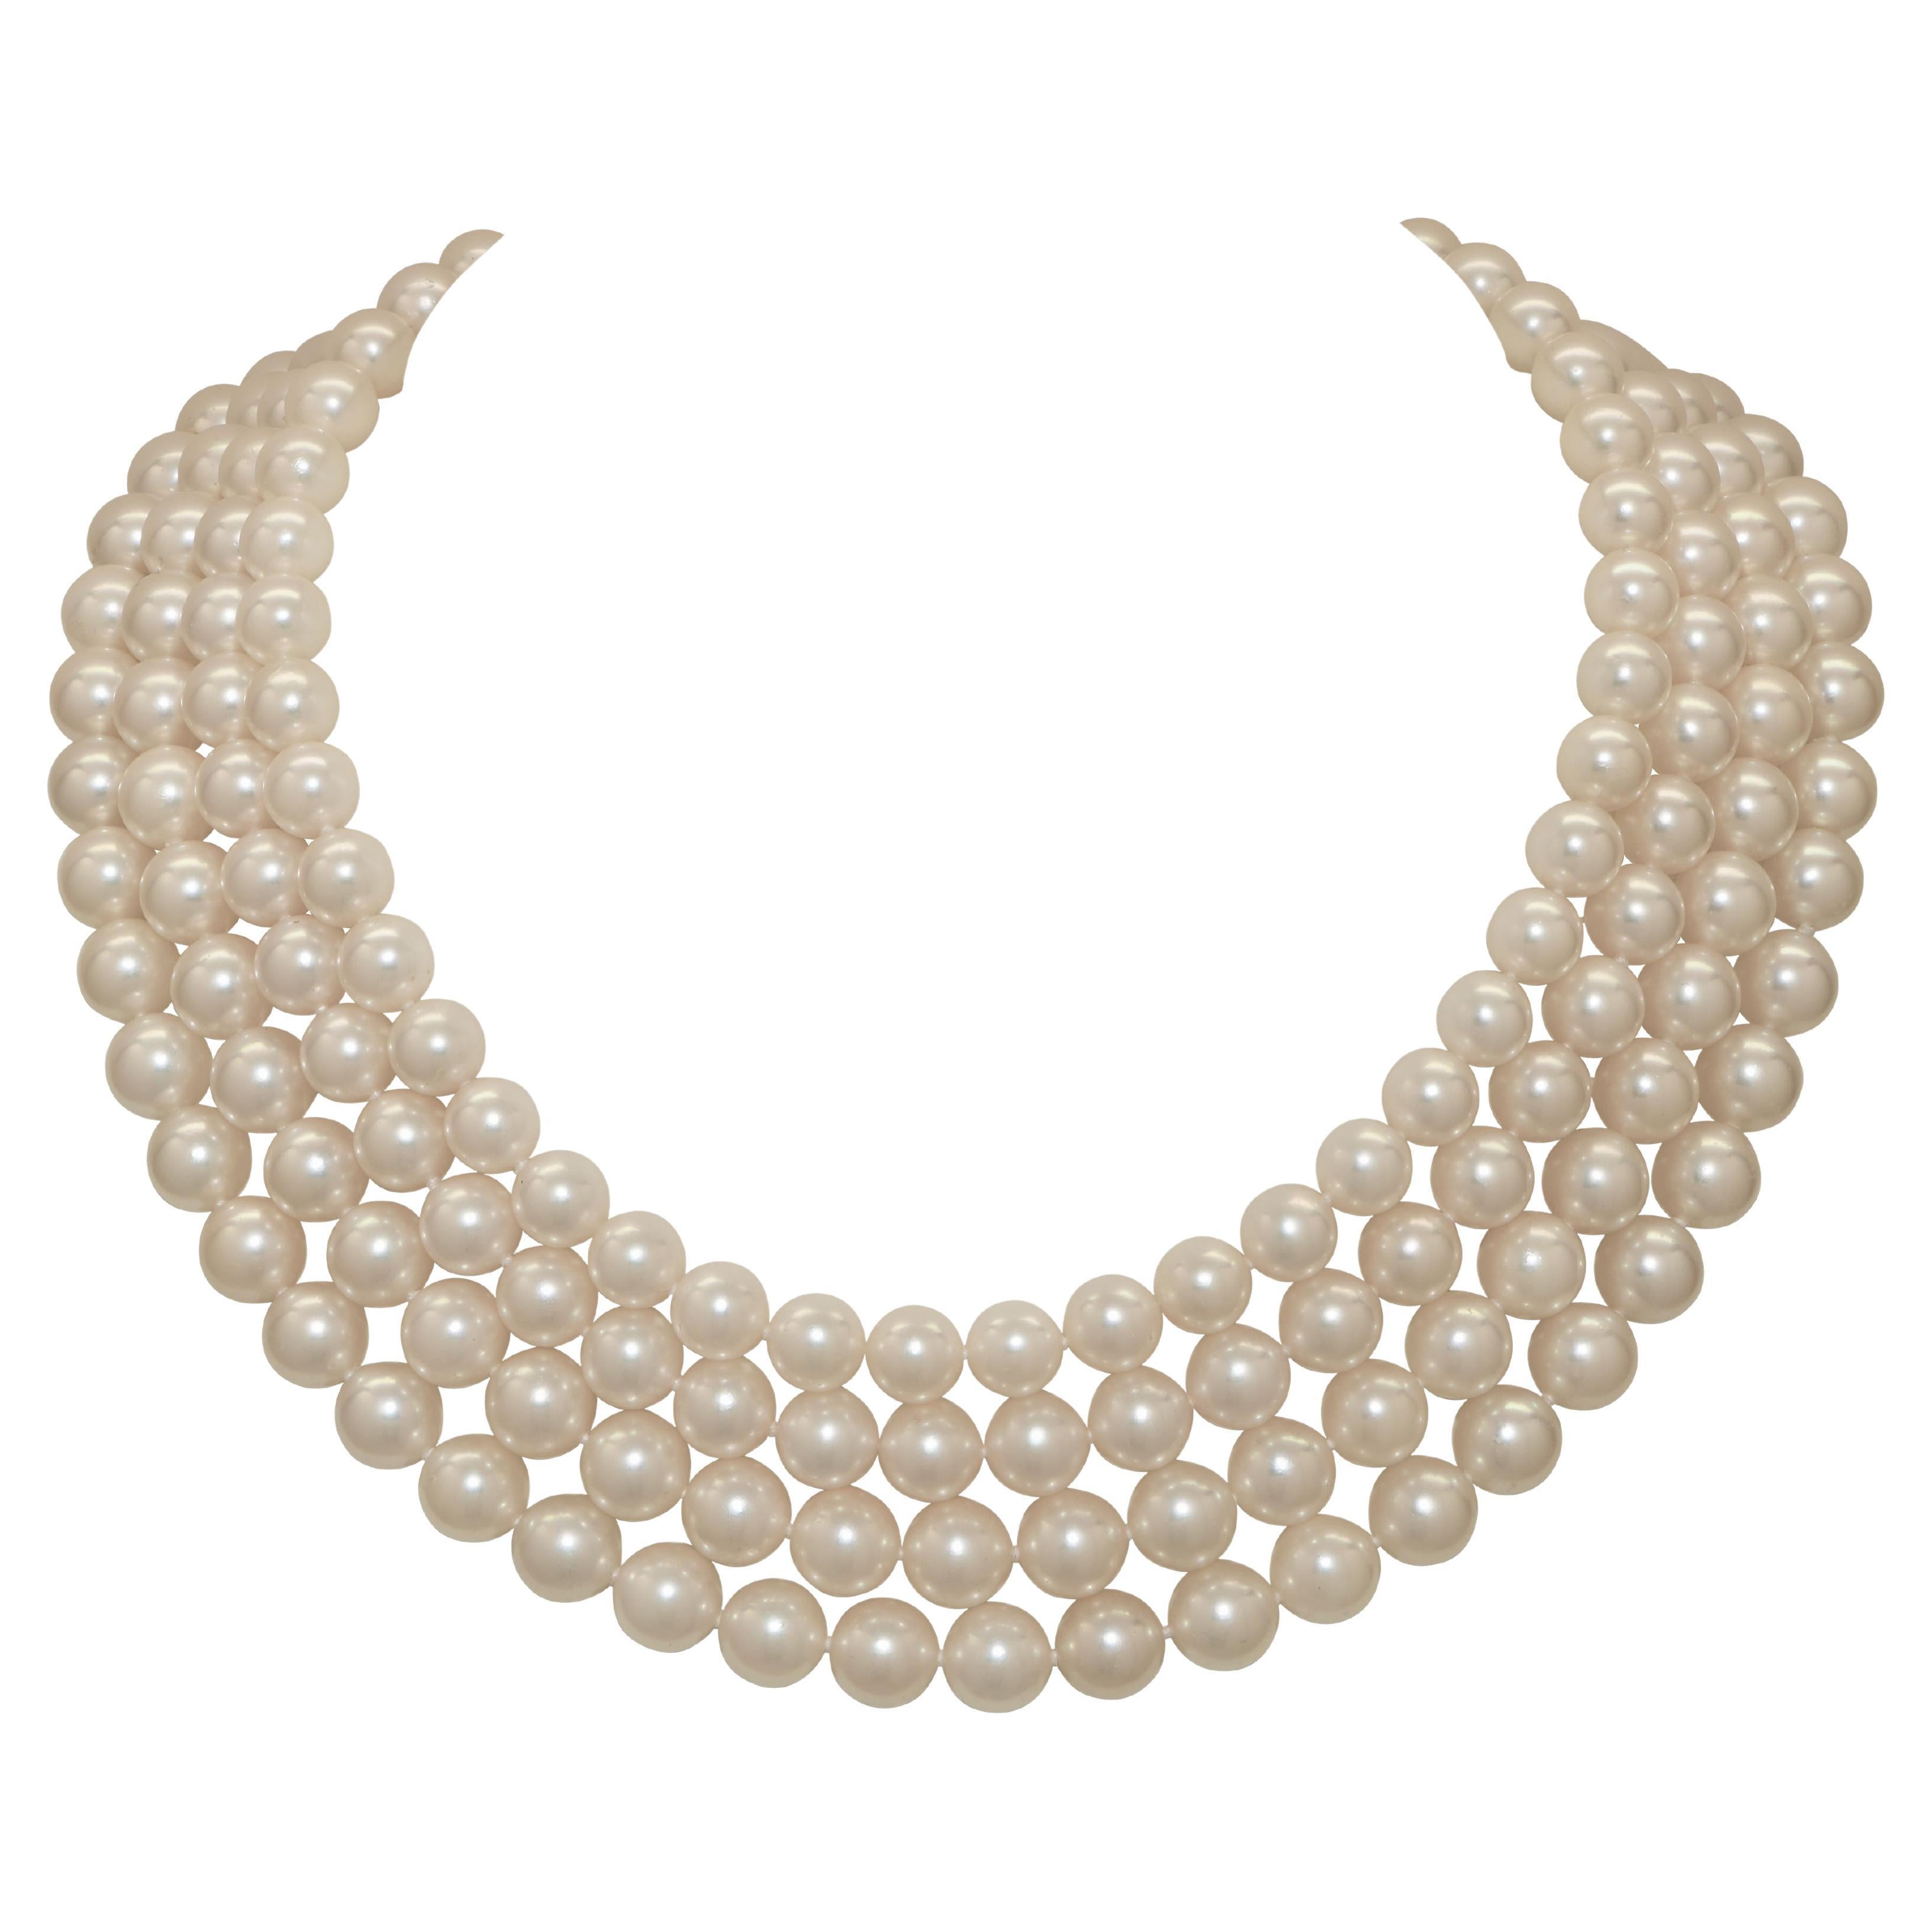 Do Mikimoto pearls hold their value?